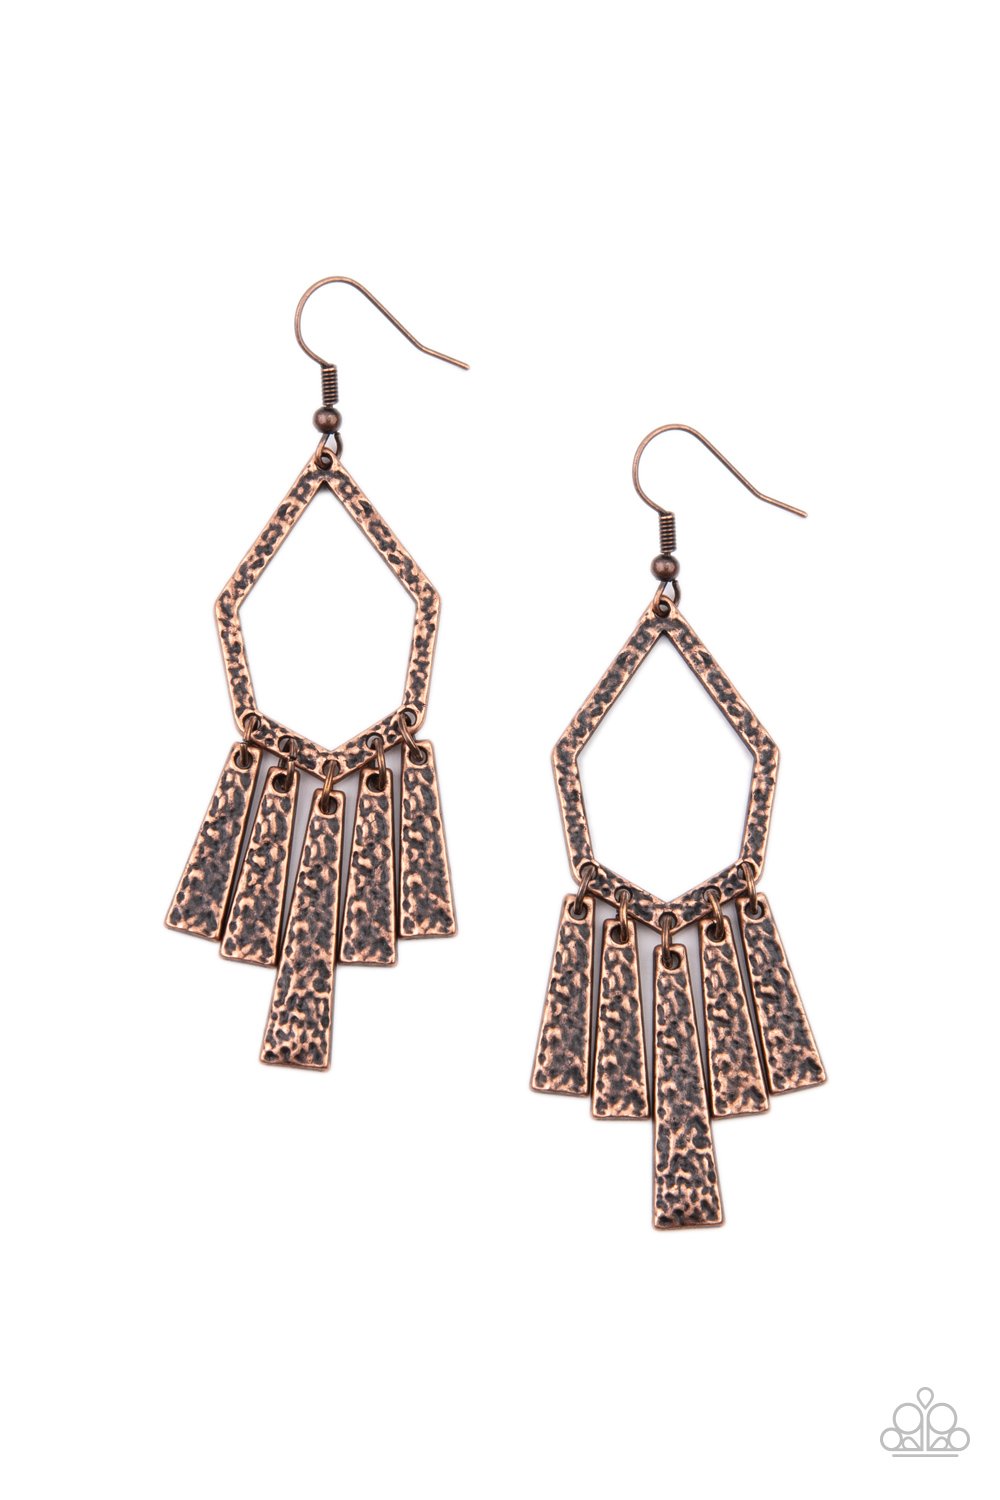 &lt;p&gt;Hammered in antiqued detail, flared rectangular frames swing from the bottom of a geometric copper frame for a rustic flair. Earring attaches to a standard fishhook fitting. &lt;/p&gt;  

&lt;p&gt; &lt;i&gt;  Sold as one pair of earrings. &lt;/i&gt;  &lt;/p&gt;


&lt;img src=\&quot;https://d9b54x484lq62.cloudfront.net/paparazzi/shopping/images/517_tag150x115_1.png\&quot; alt=\&quot;New Kit\&quot; align=\&quot;middle\&quot; height=\&quot;50\&quot; width=\&quot;50\&quot;&gt;